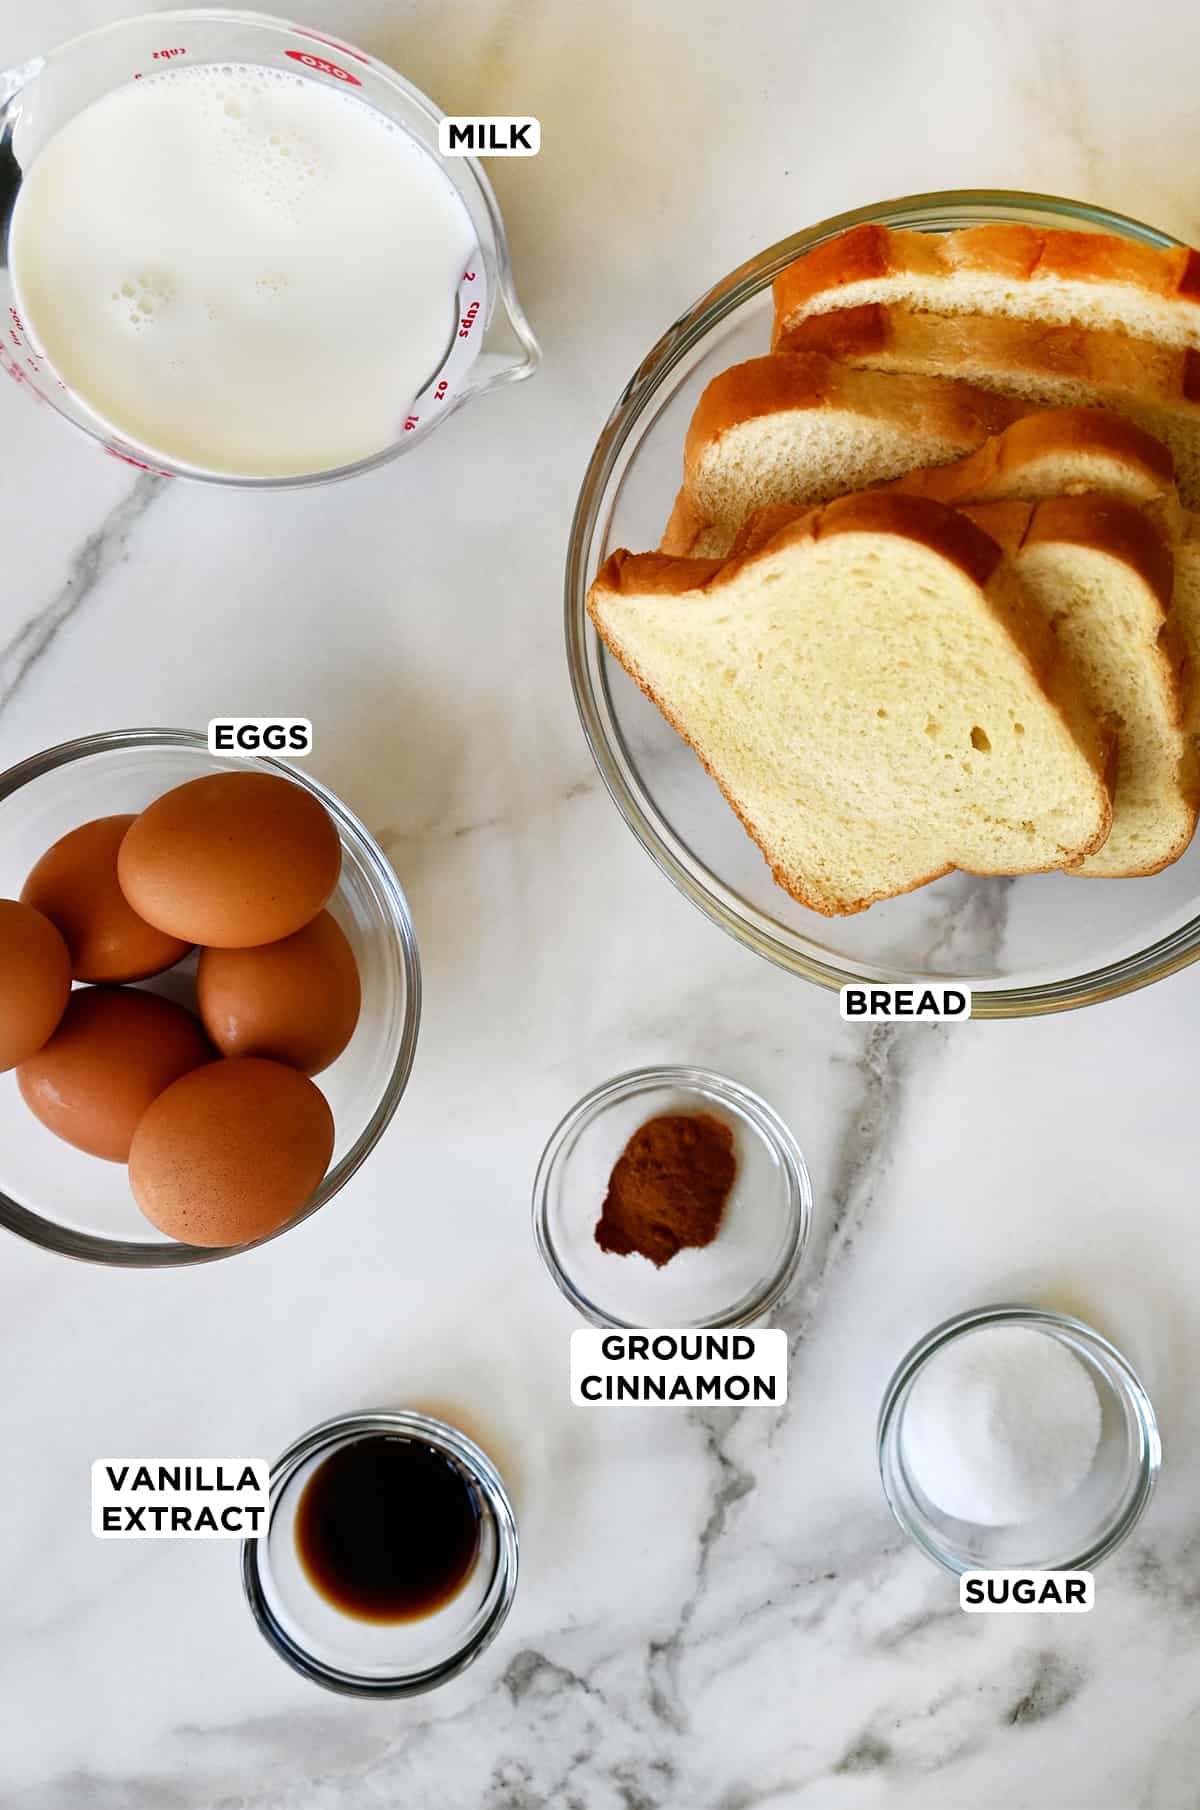 Various sizes of clear bowls containing the ingredients needed to make French toast muffins, including Brioche bread, ground cinnamon, sugar, vanilla extract and whole milk.